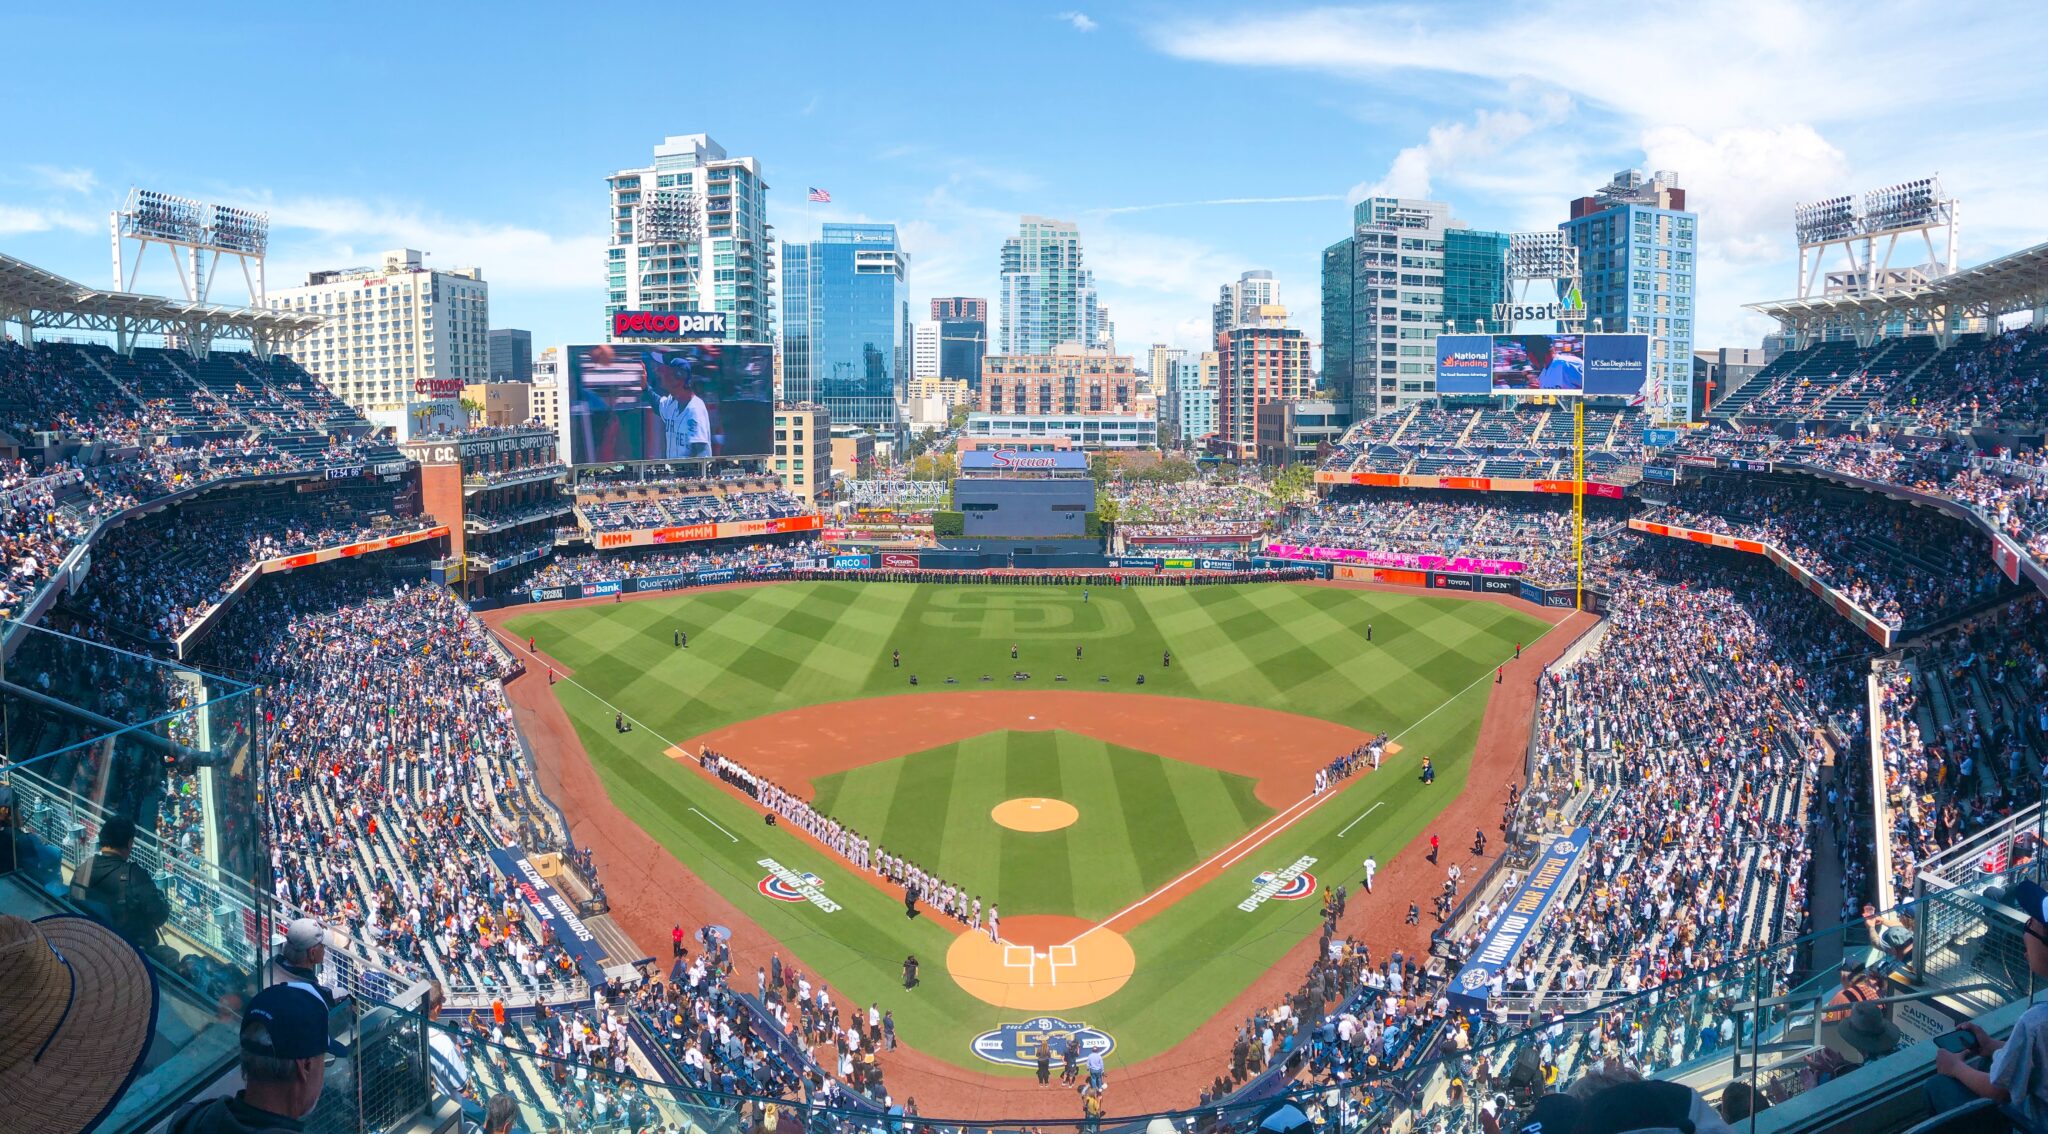 Petco Park (San Diego) – Society for American Baseball Research